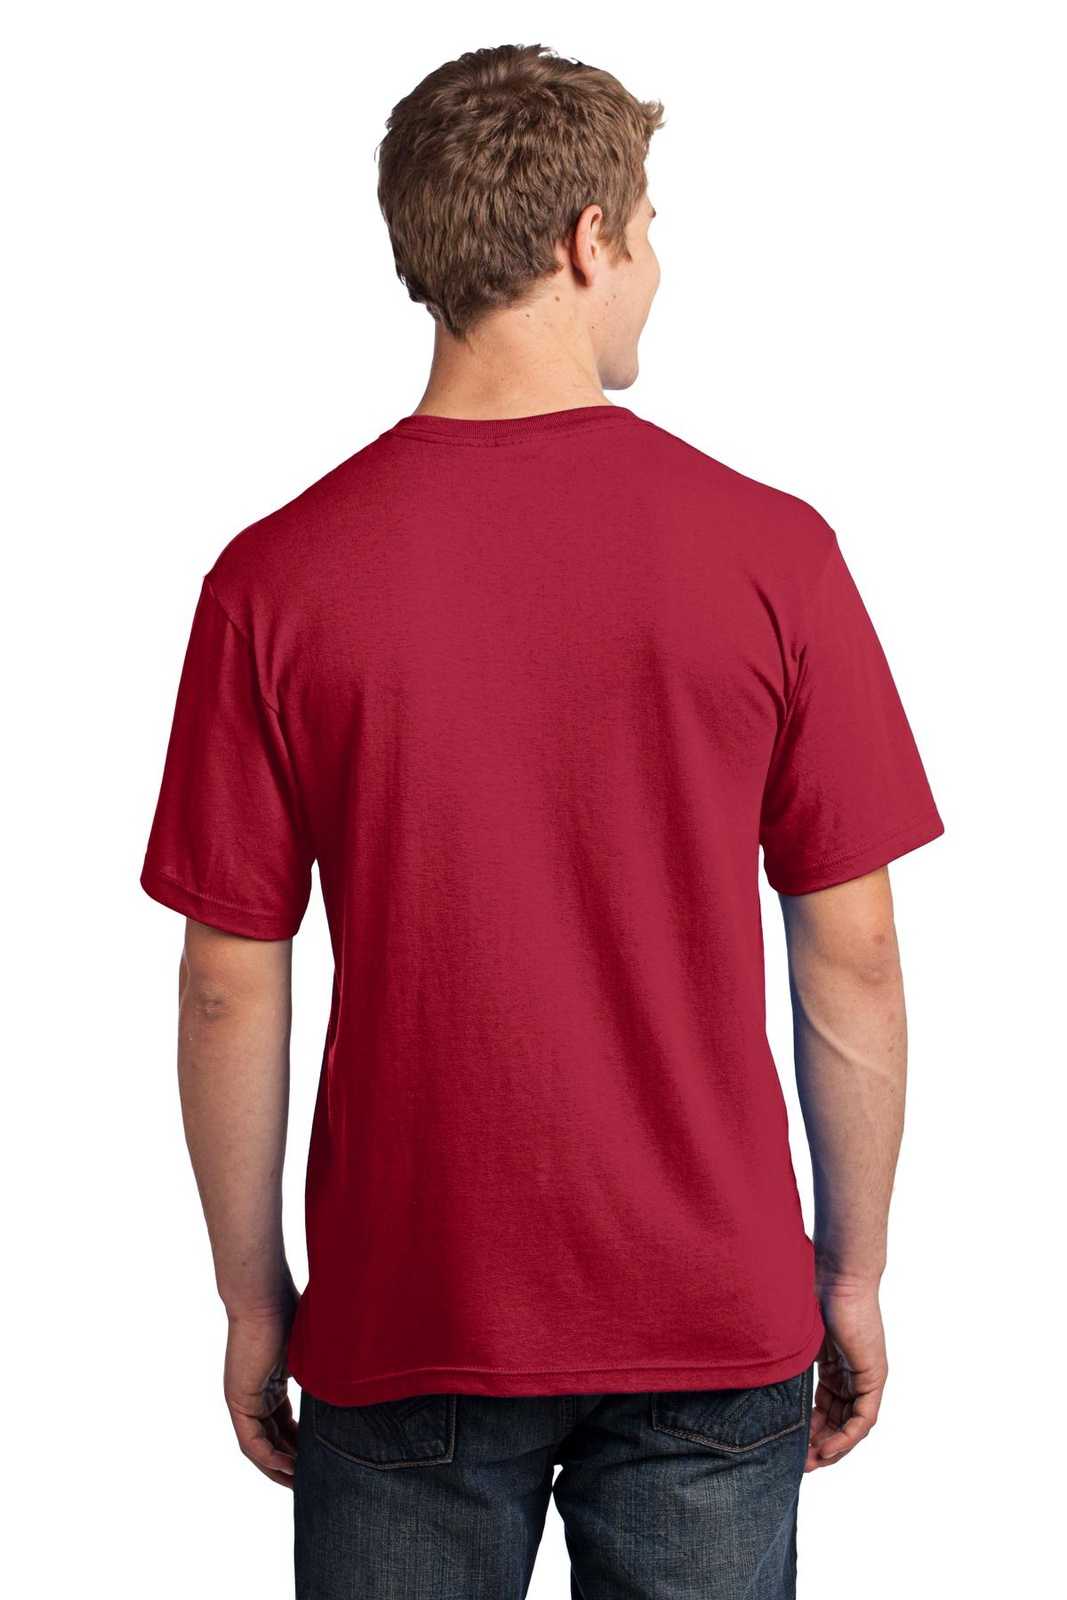 Port &amp; Company USA100 All-American Tee - Red - HIT a Double - 2